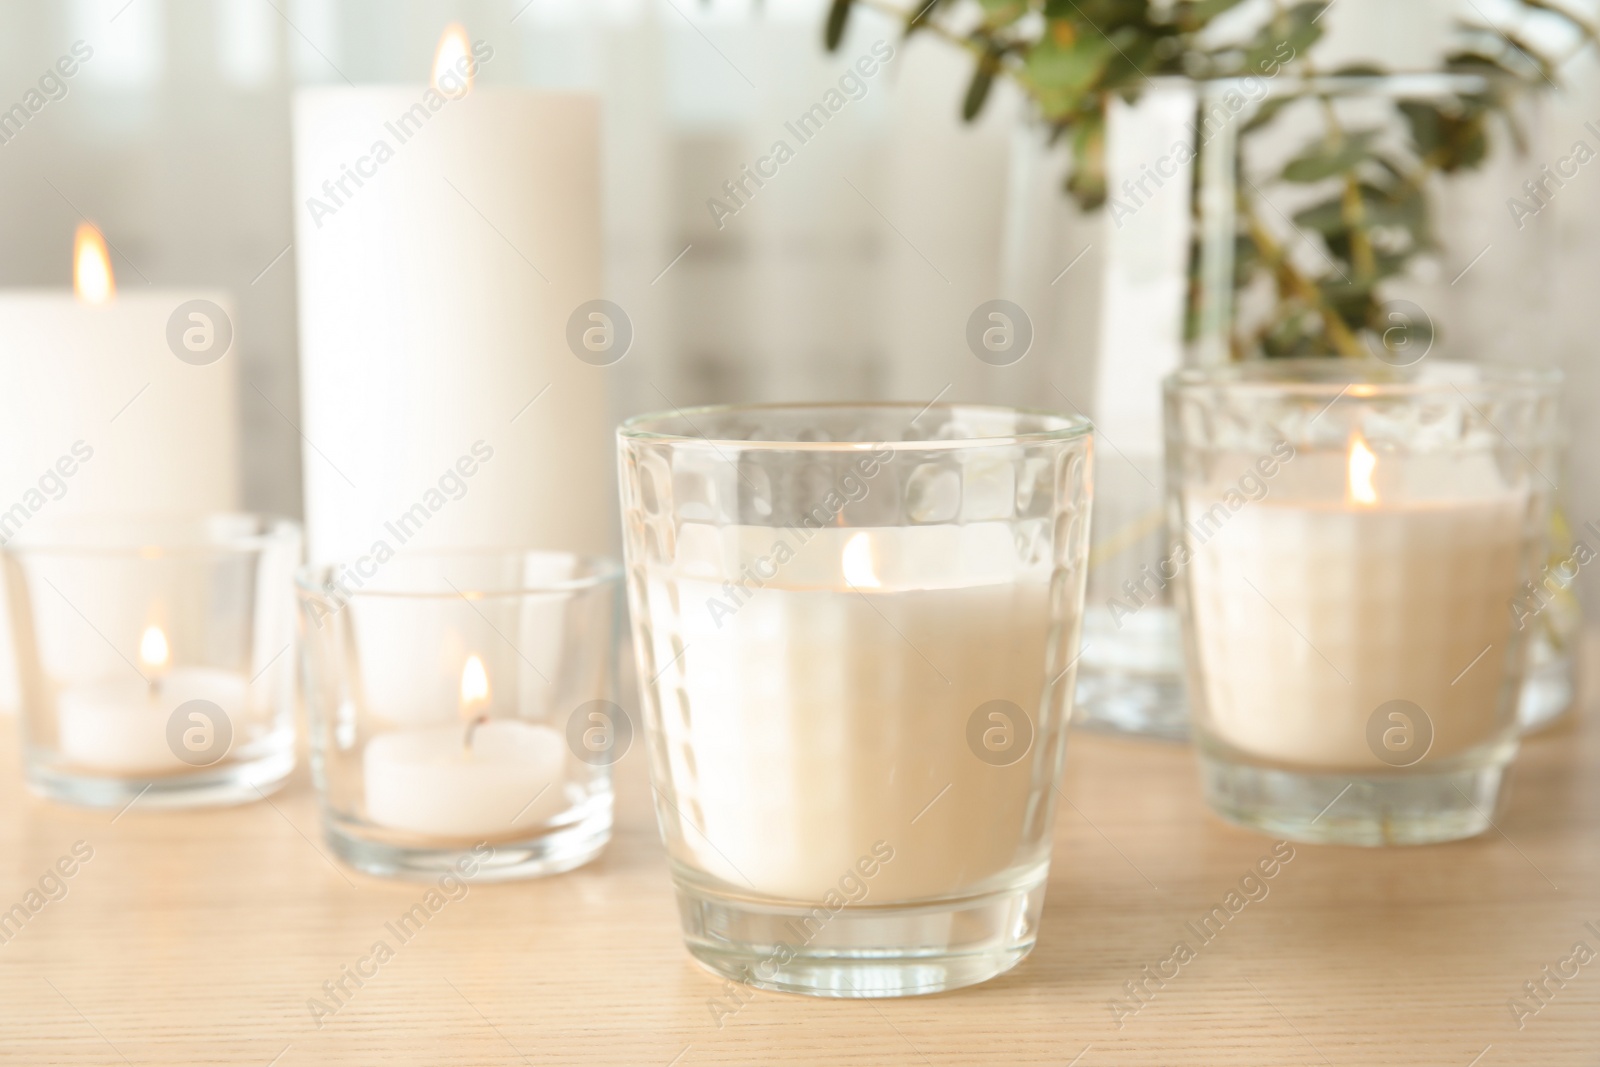 Photo of Burning aromatic candles on wooden table. Interior decor